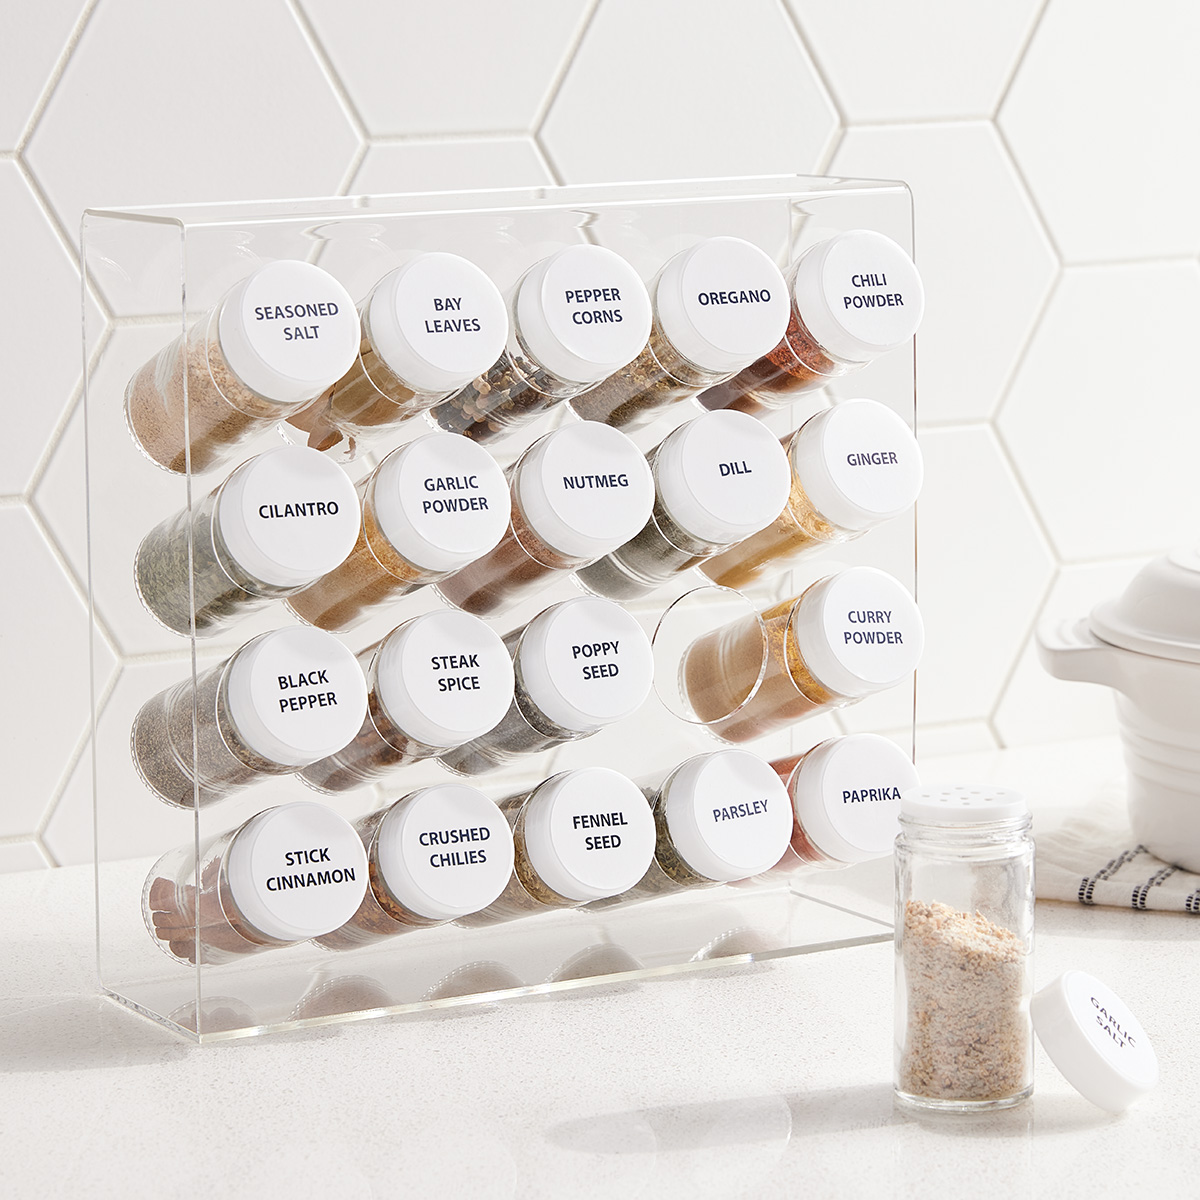 https://www.containerstore.com/catalogimages/443909/665030_acrylic_20-bottle_spice_rack_.jpg